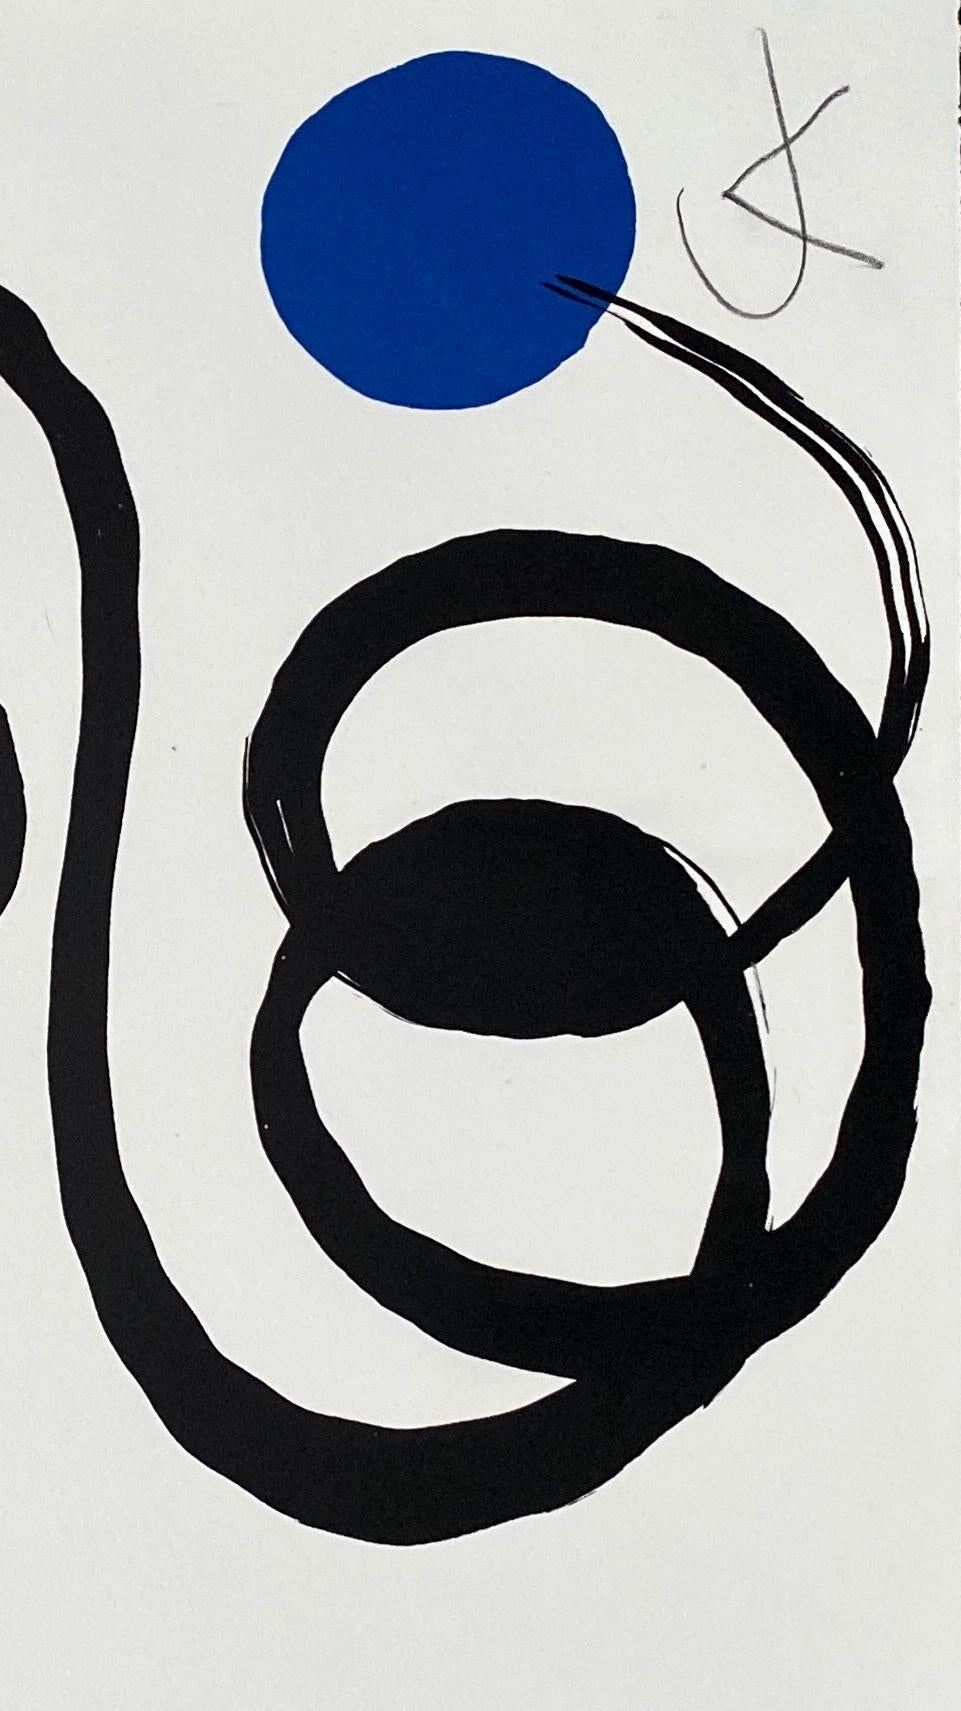 Alexander Calder
Black Spiral, Red & Blue Bubbles

Original lithograph, 1967
Hand signed in pencil by the artist
Annotated EA (épreuve d'artiste / artist proof) aside the edition of 150 copies
On Rives vellum size 37 x 56 cm
Very good condition